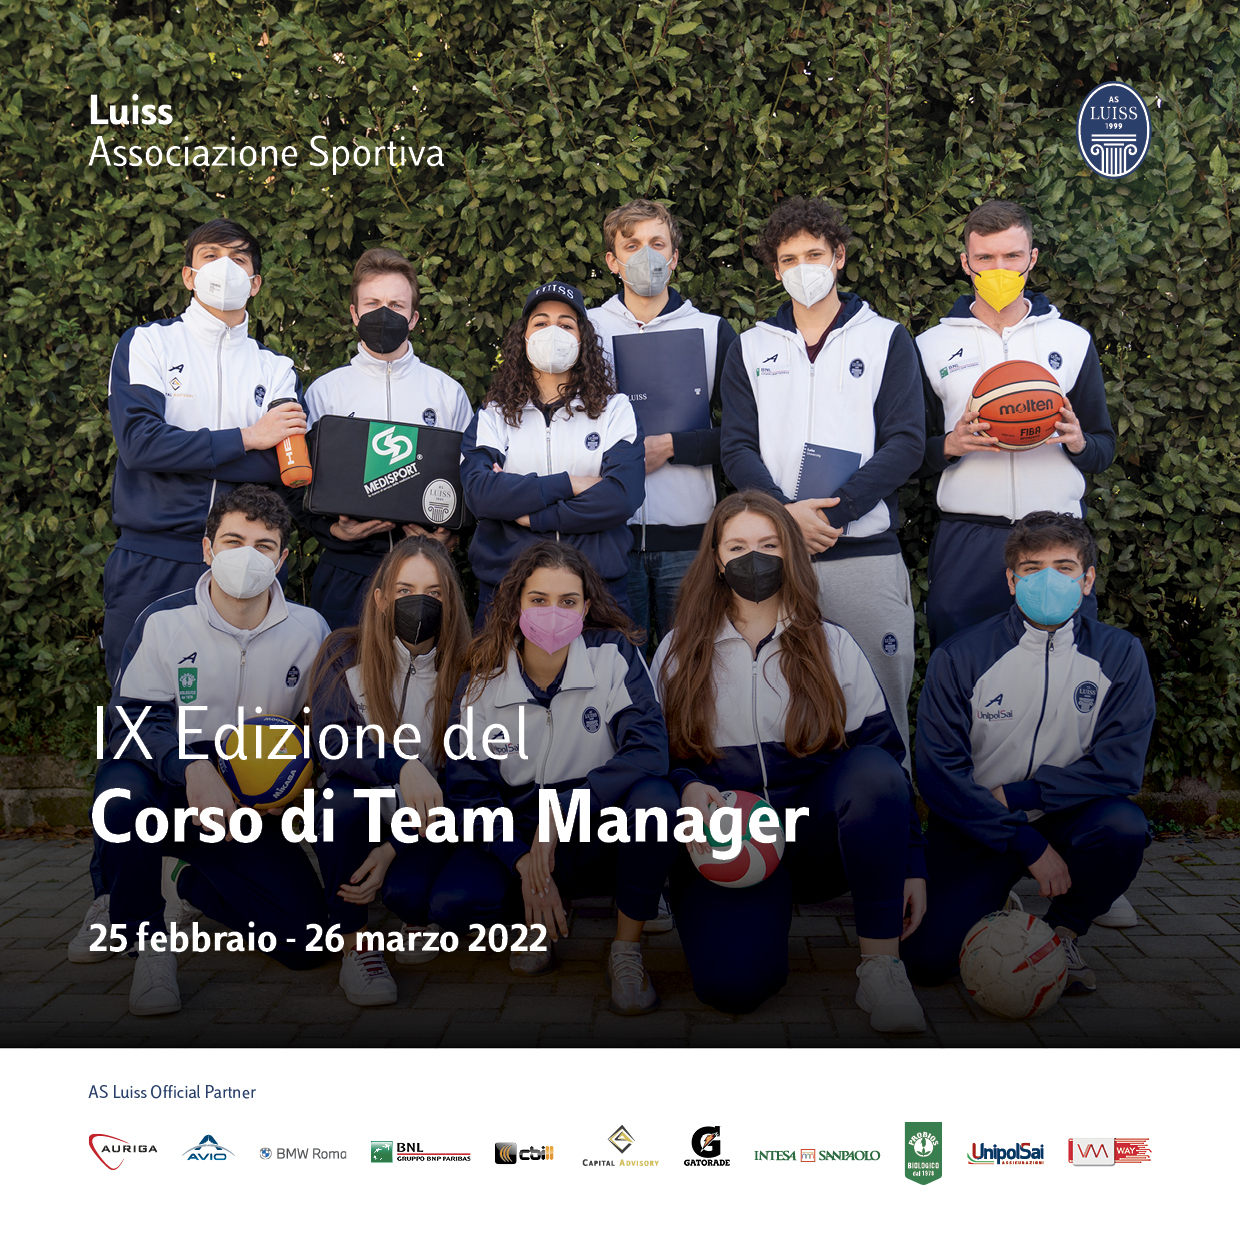 20220131_AS_Luiss_STD_Team Manager_V3